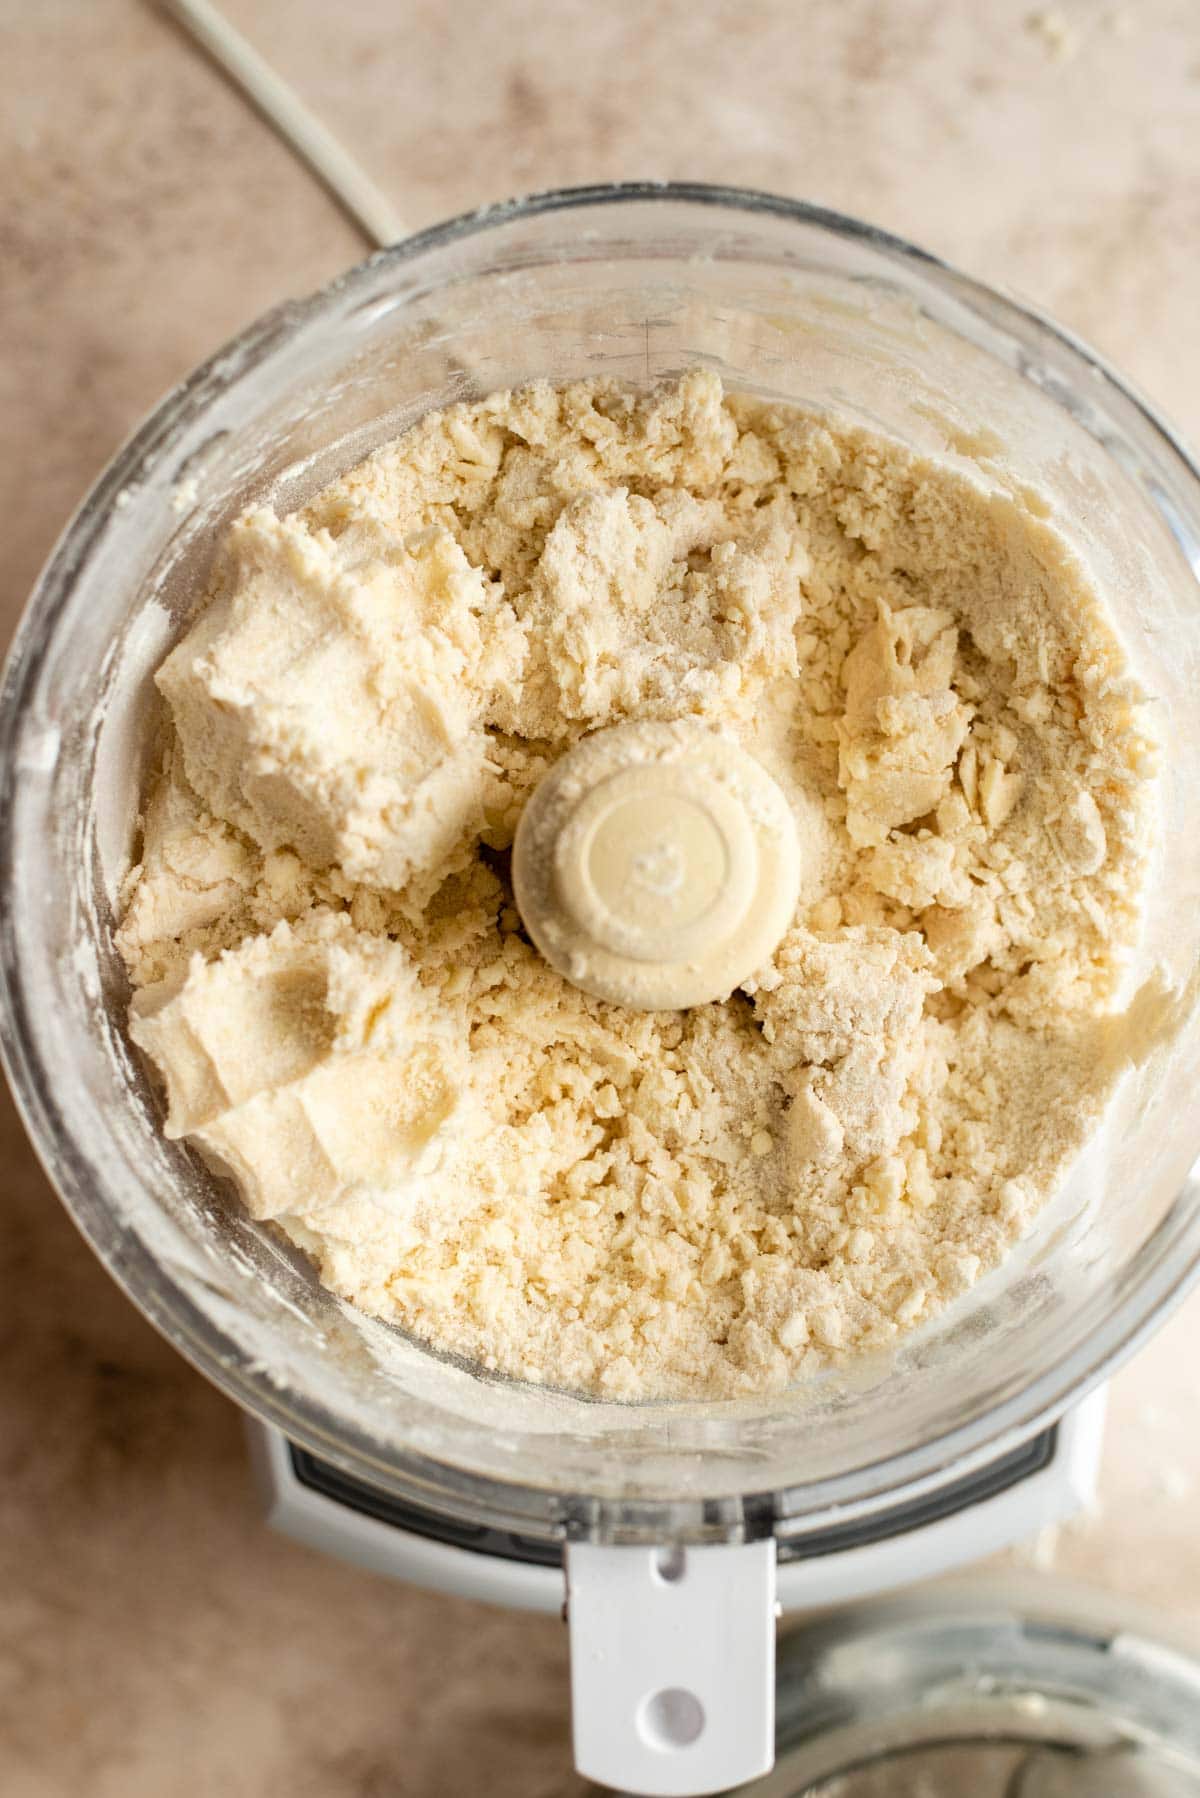 The blended pie dough in the food processor.